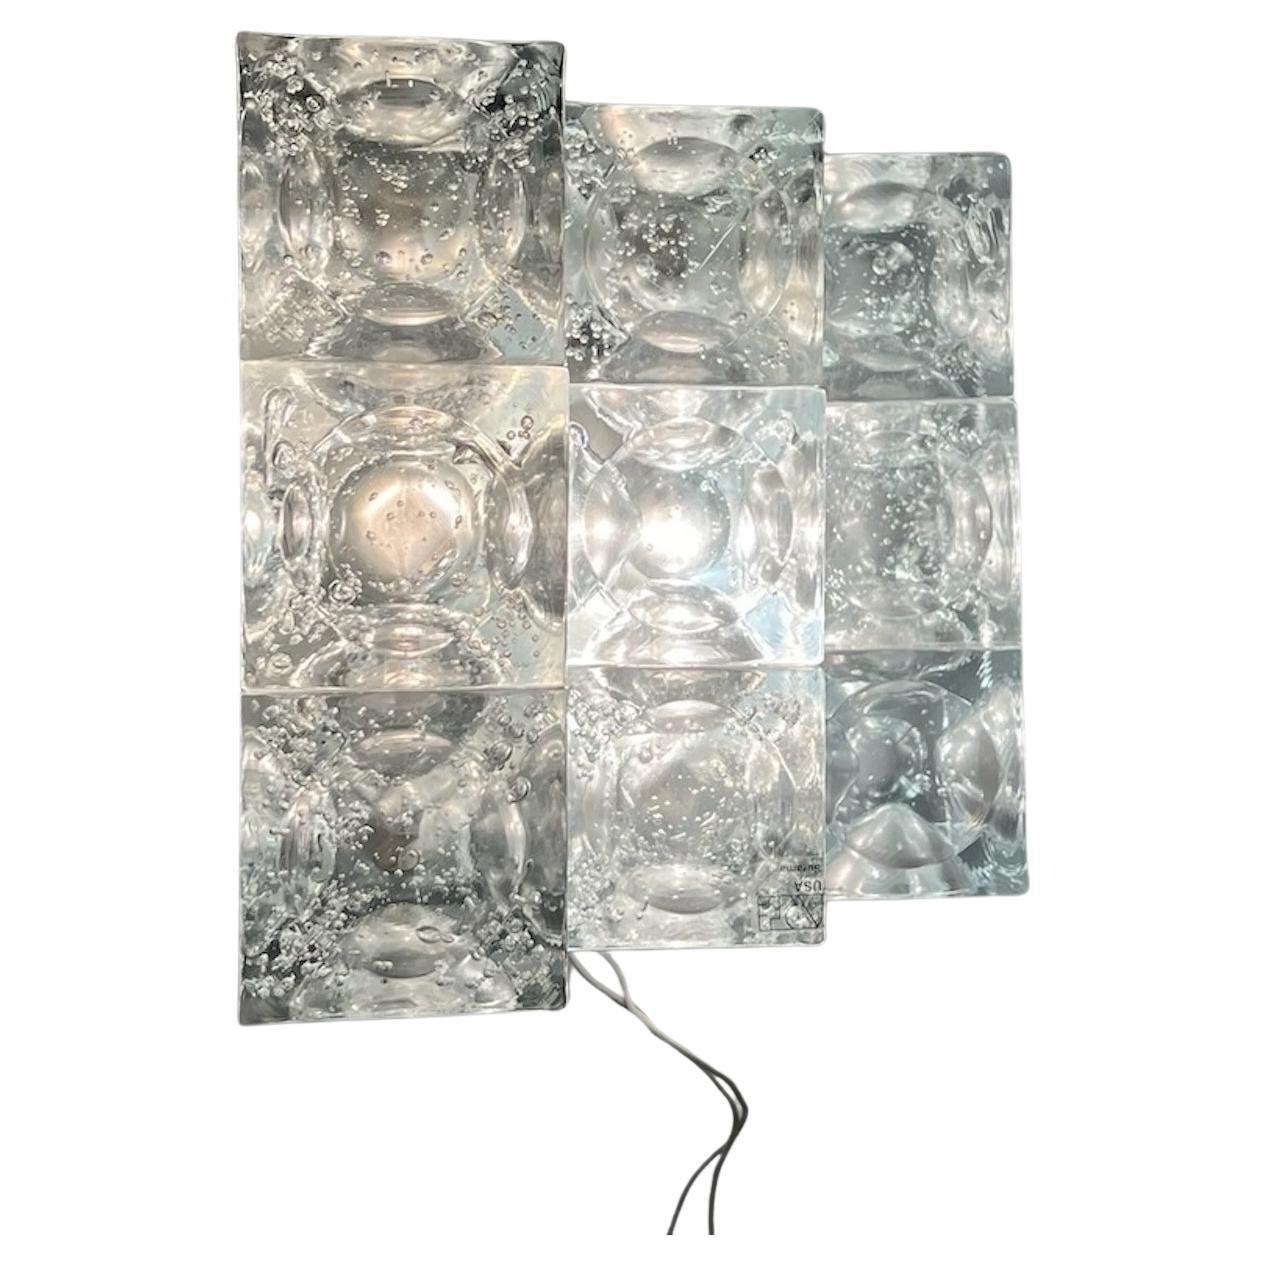 Immerse your space in the enchanting glow of vintage 70s lamps with this rare find – the Poliarte ‘Cetusa’ Sconce by Surama, produced by Poli Arte Verona in the iconic 1970s. This almost unfindable applique is a testament to Italian design prowess